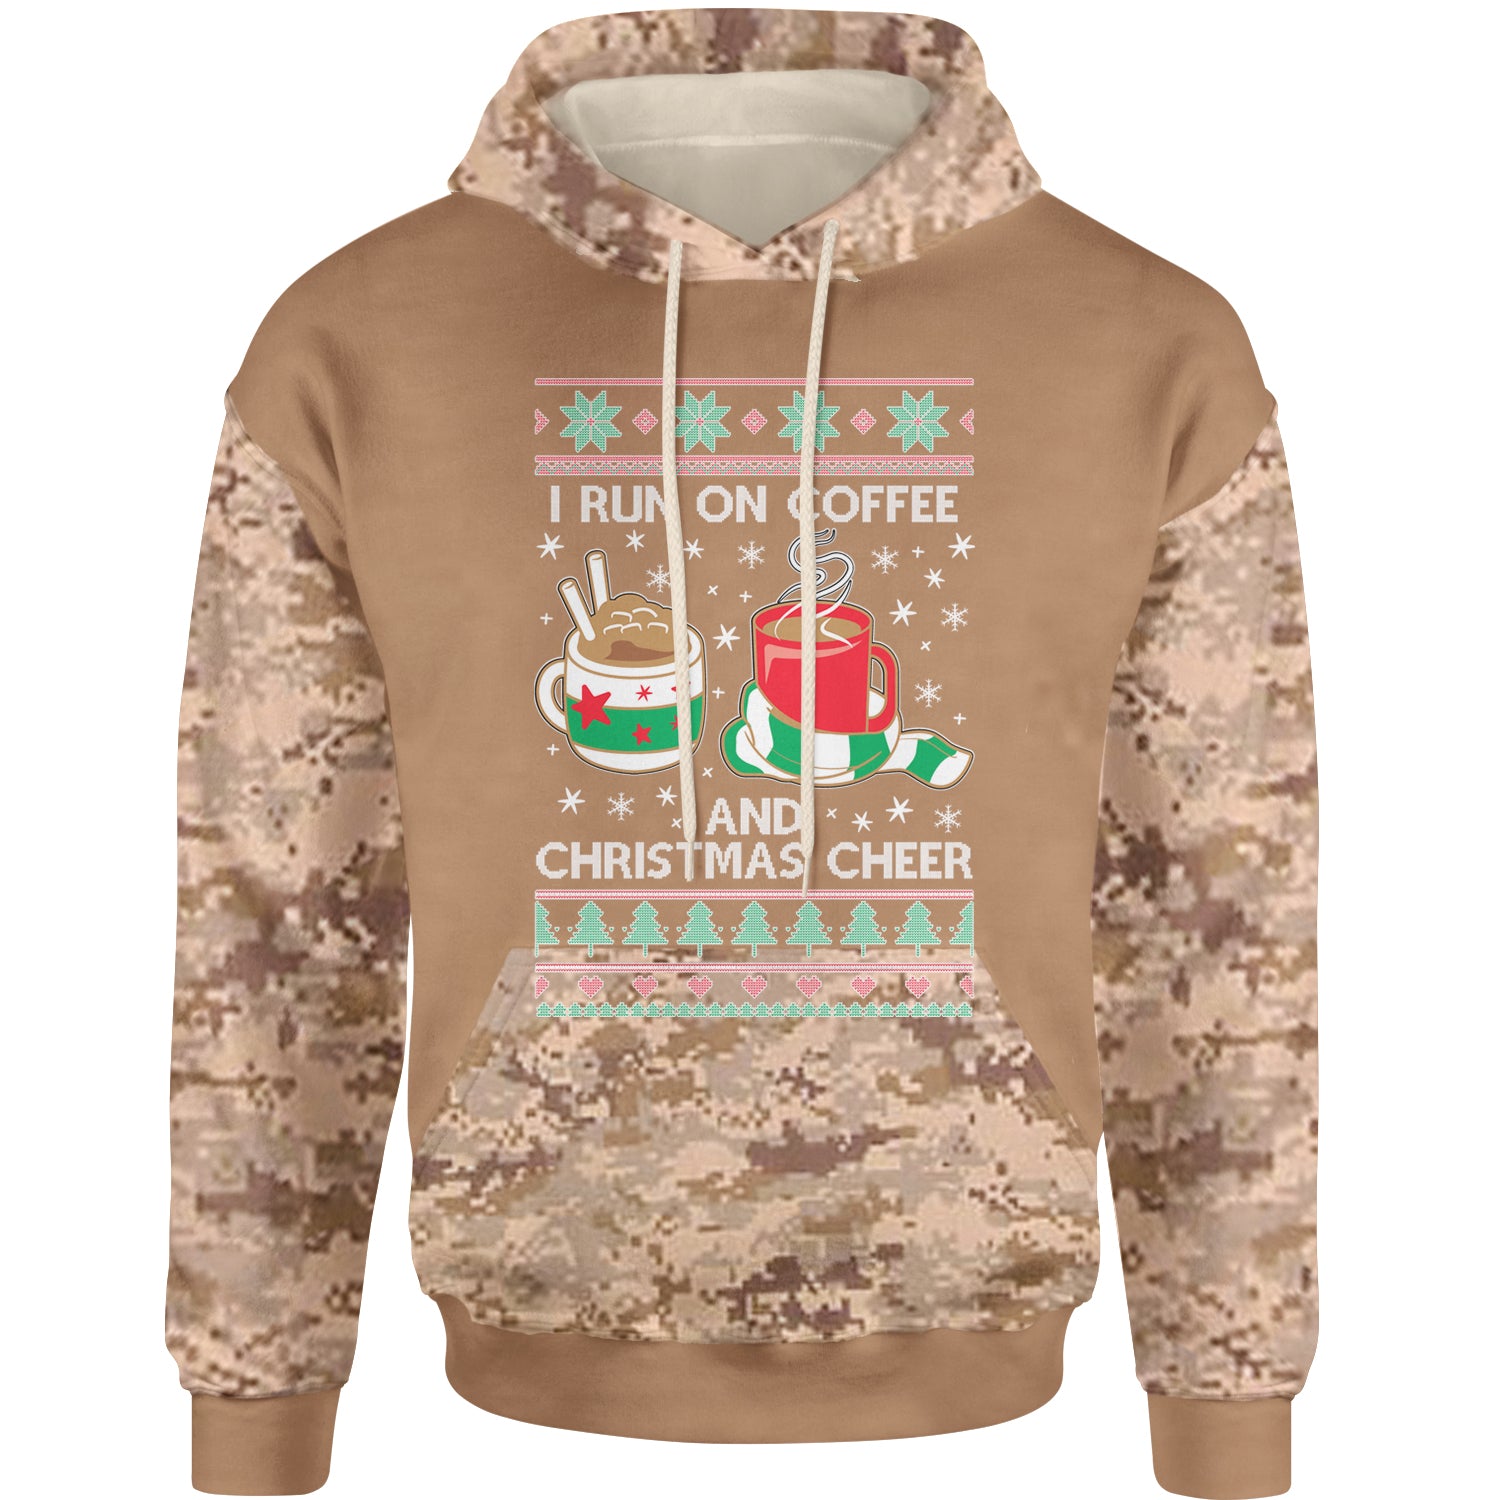 I Run On Coffee And Christmas Cheer Adult Hoodie Sweatshirt christmas, sweater, sweatshirt, ugly by Expression Tees